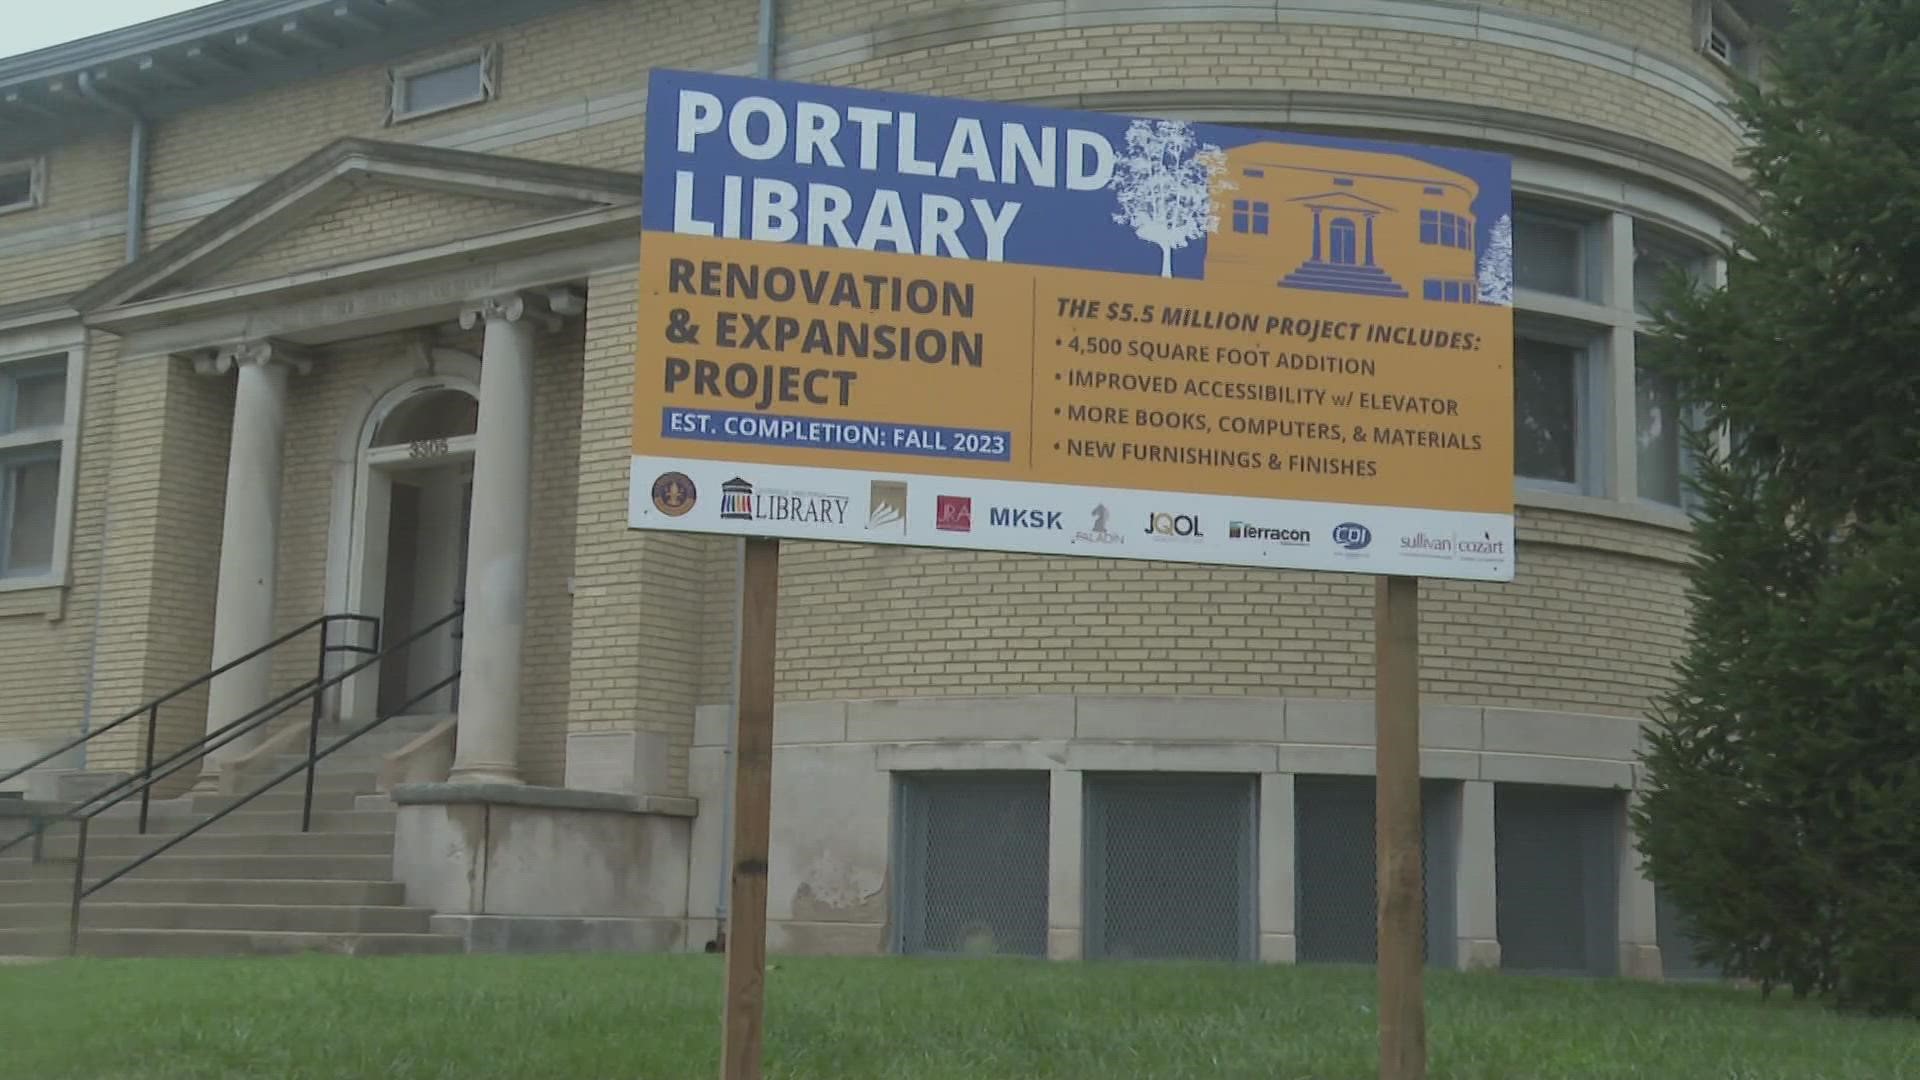 Once complete, the Portland Library will be fully accessible and among the changes will include an expanded collection of books, and more computers.